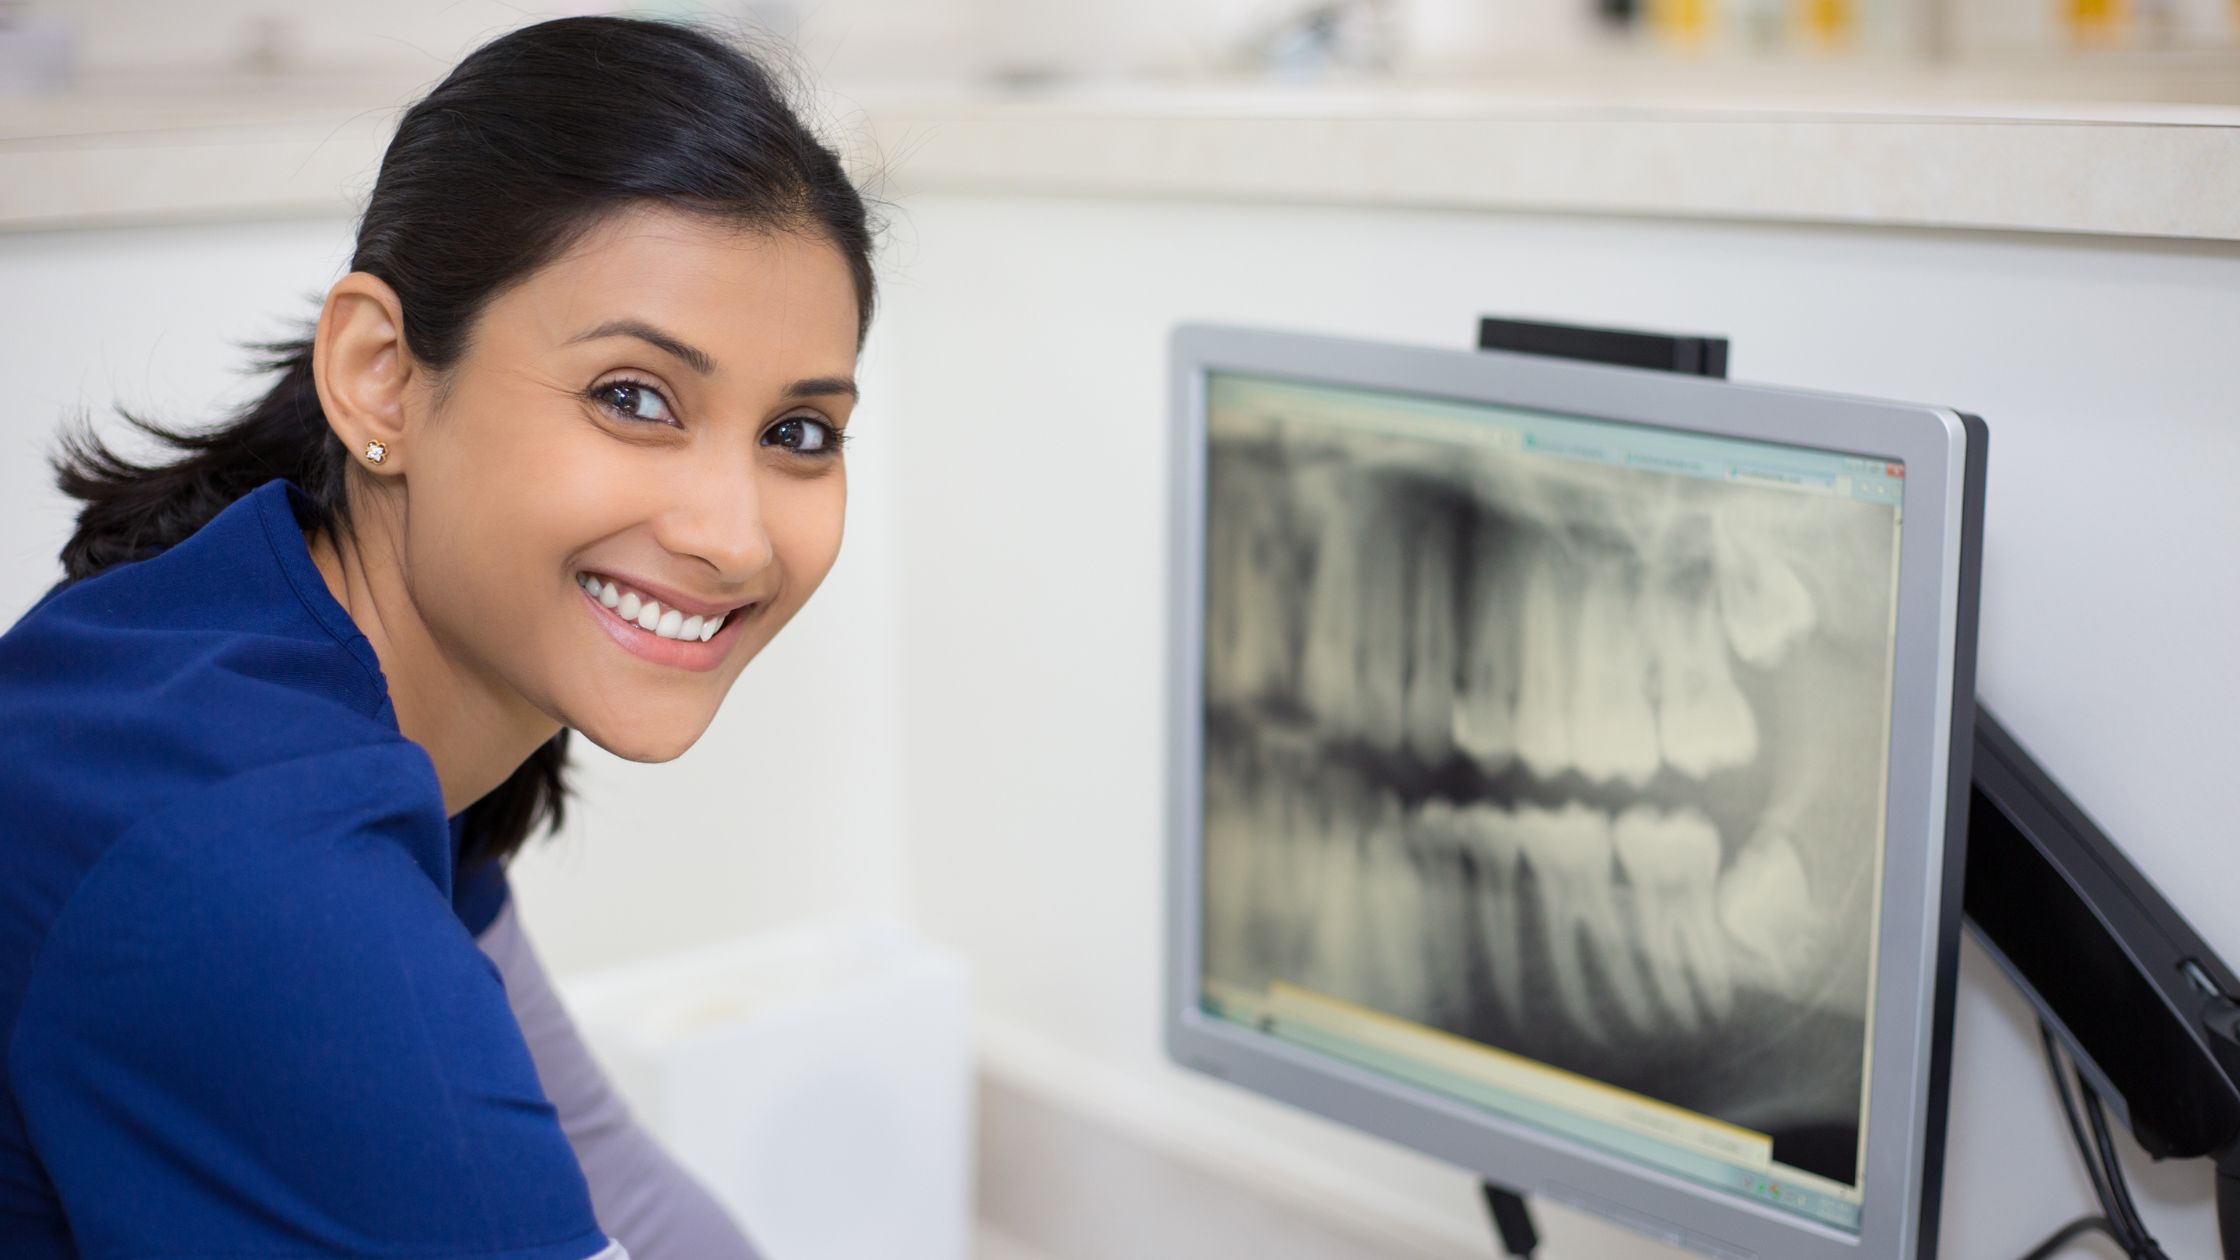 Advancements in dental imaging and how it benefits patient outcomes